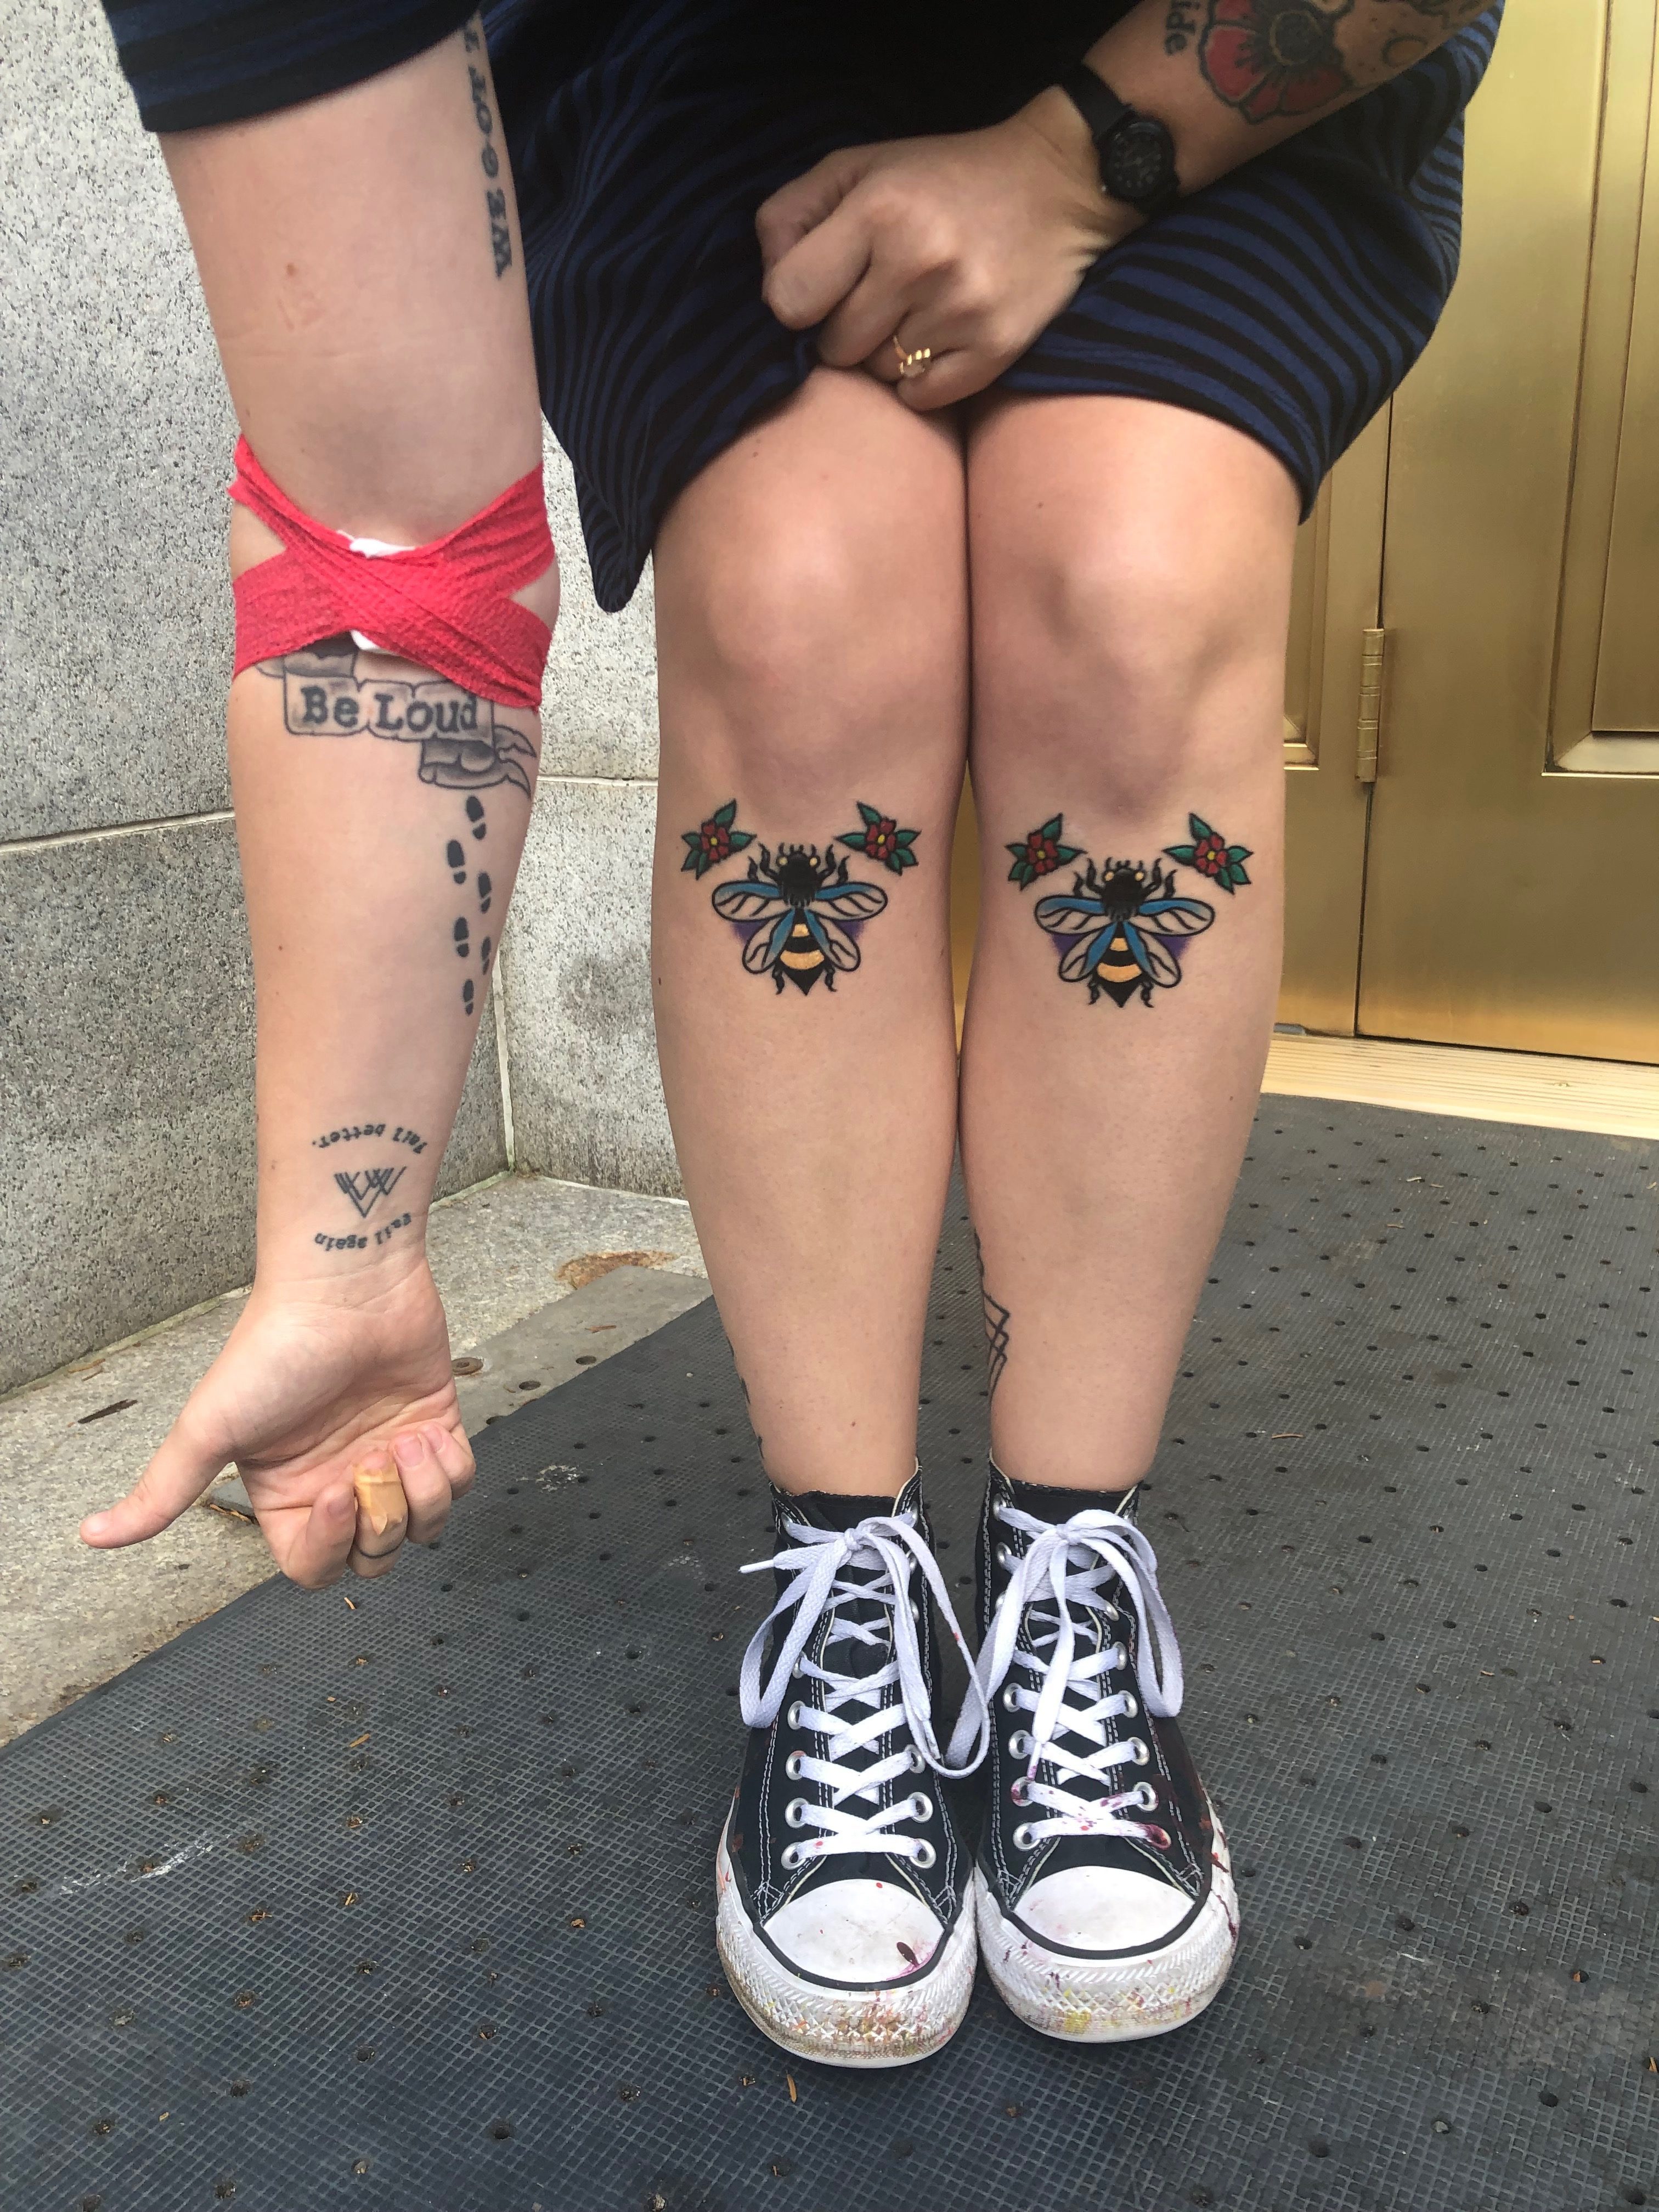 Donating Blood with Tattoos: Can I Really Do Both?